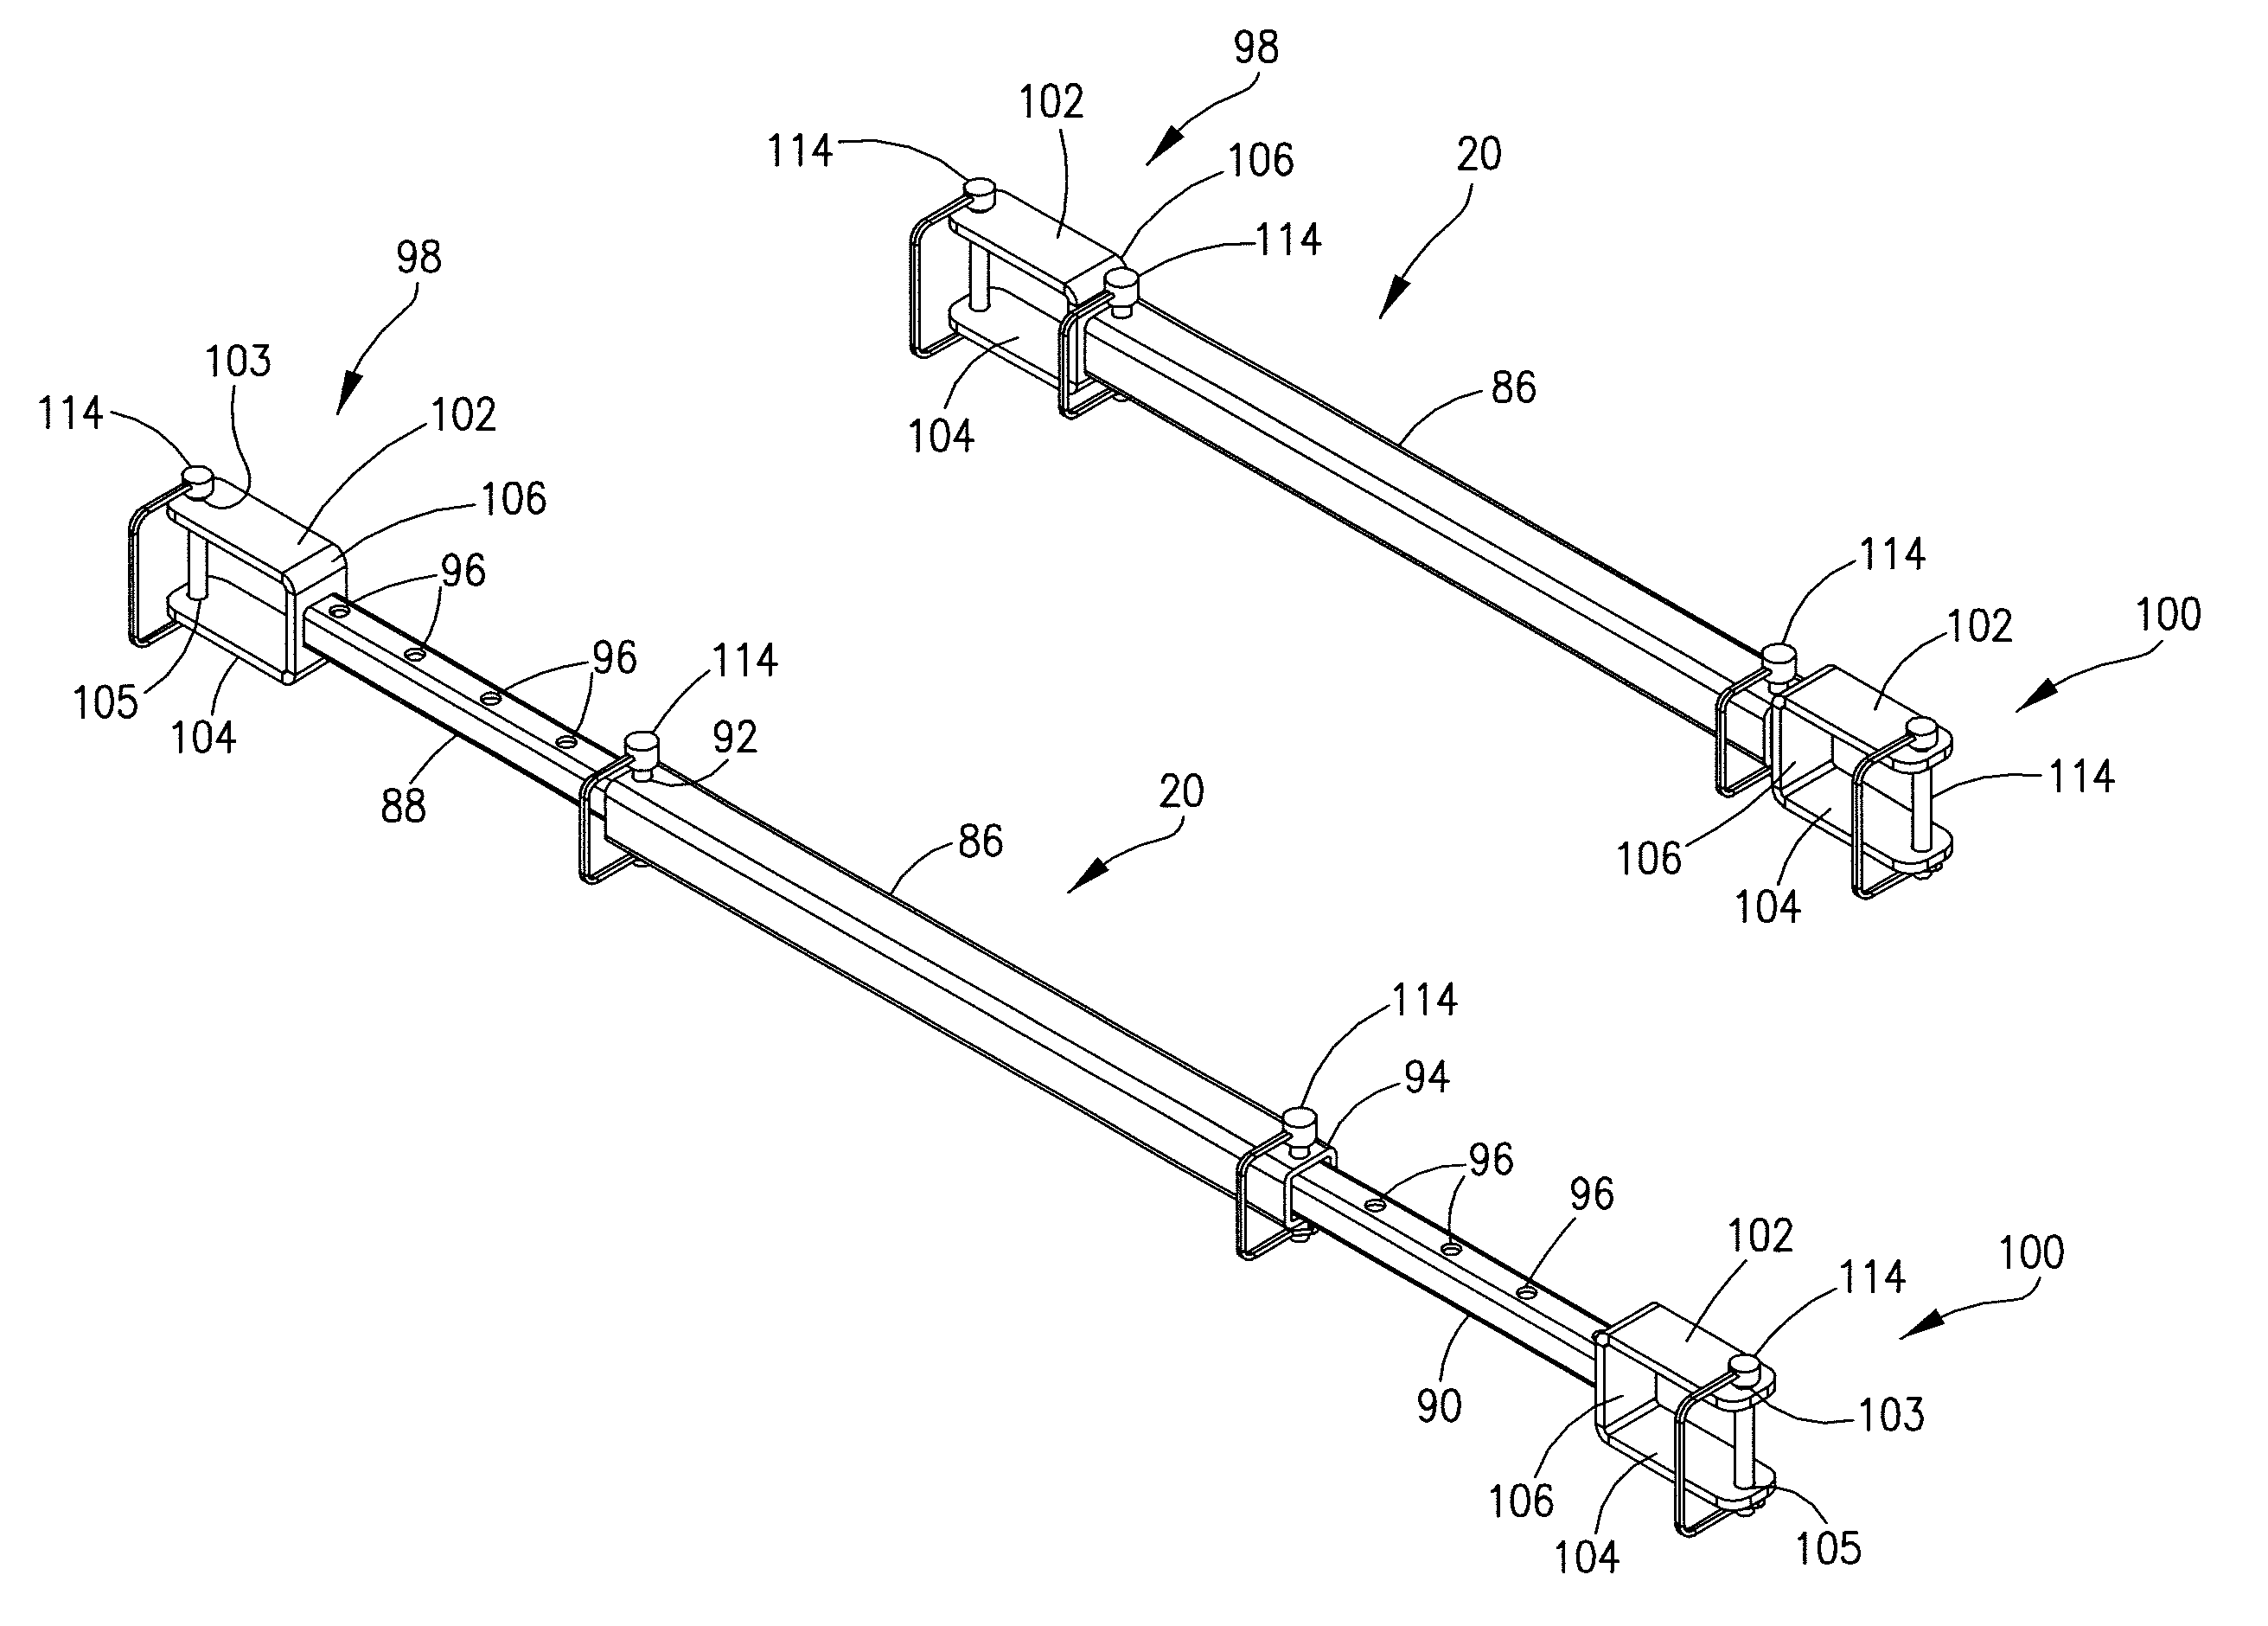 Clamp-on fork lift attachment with stabilizer bar